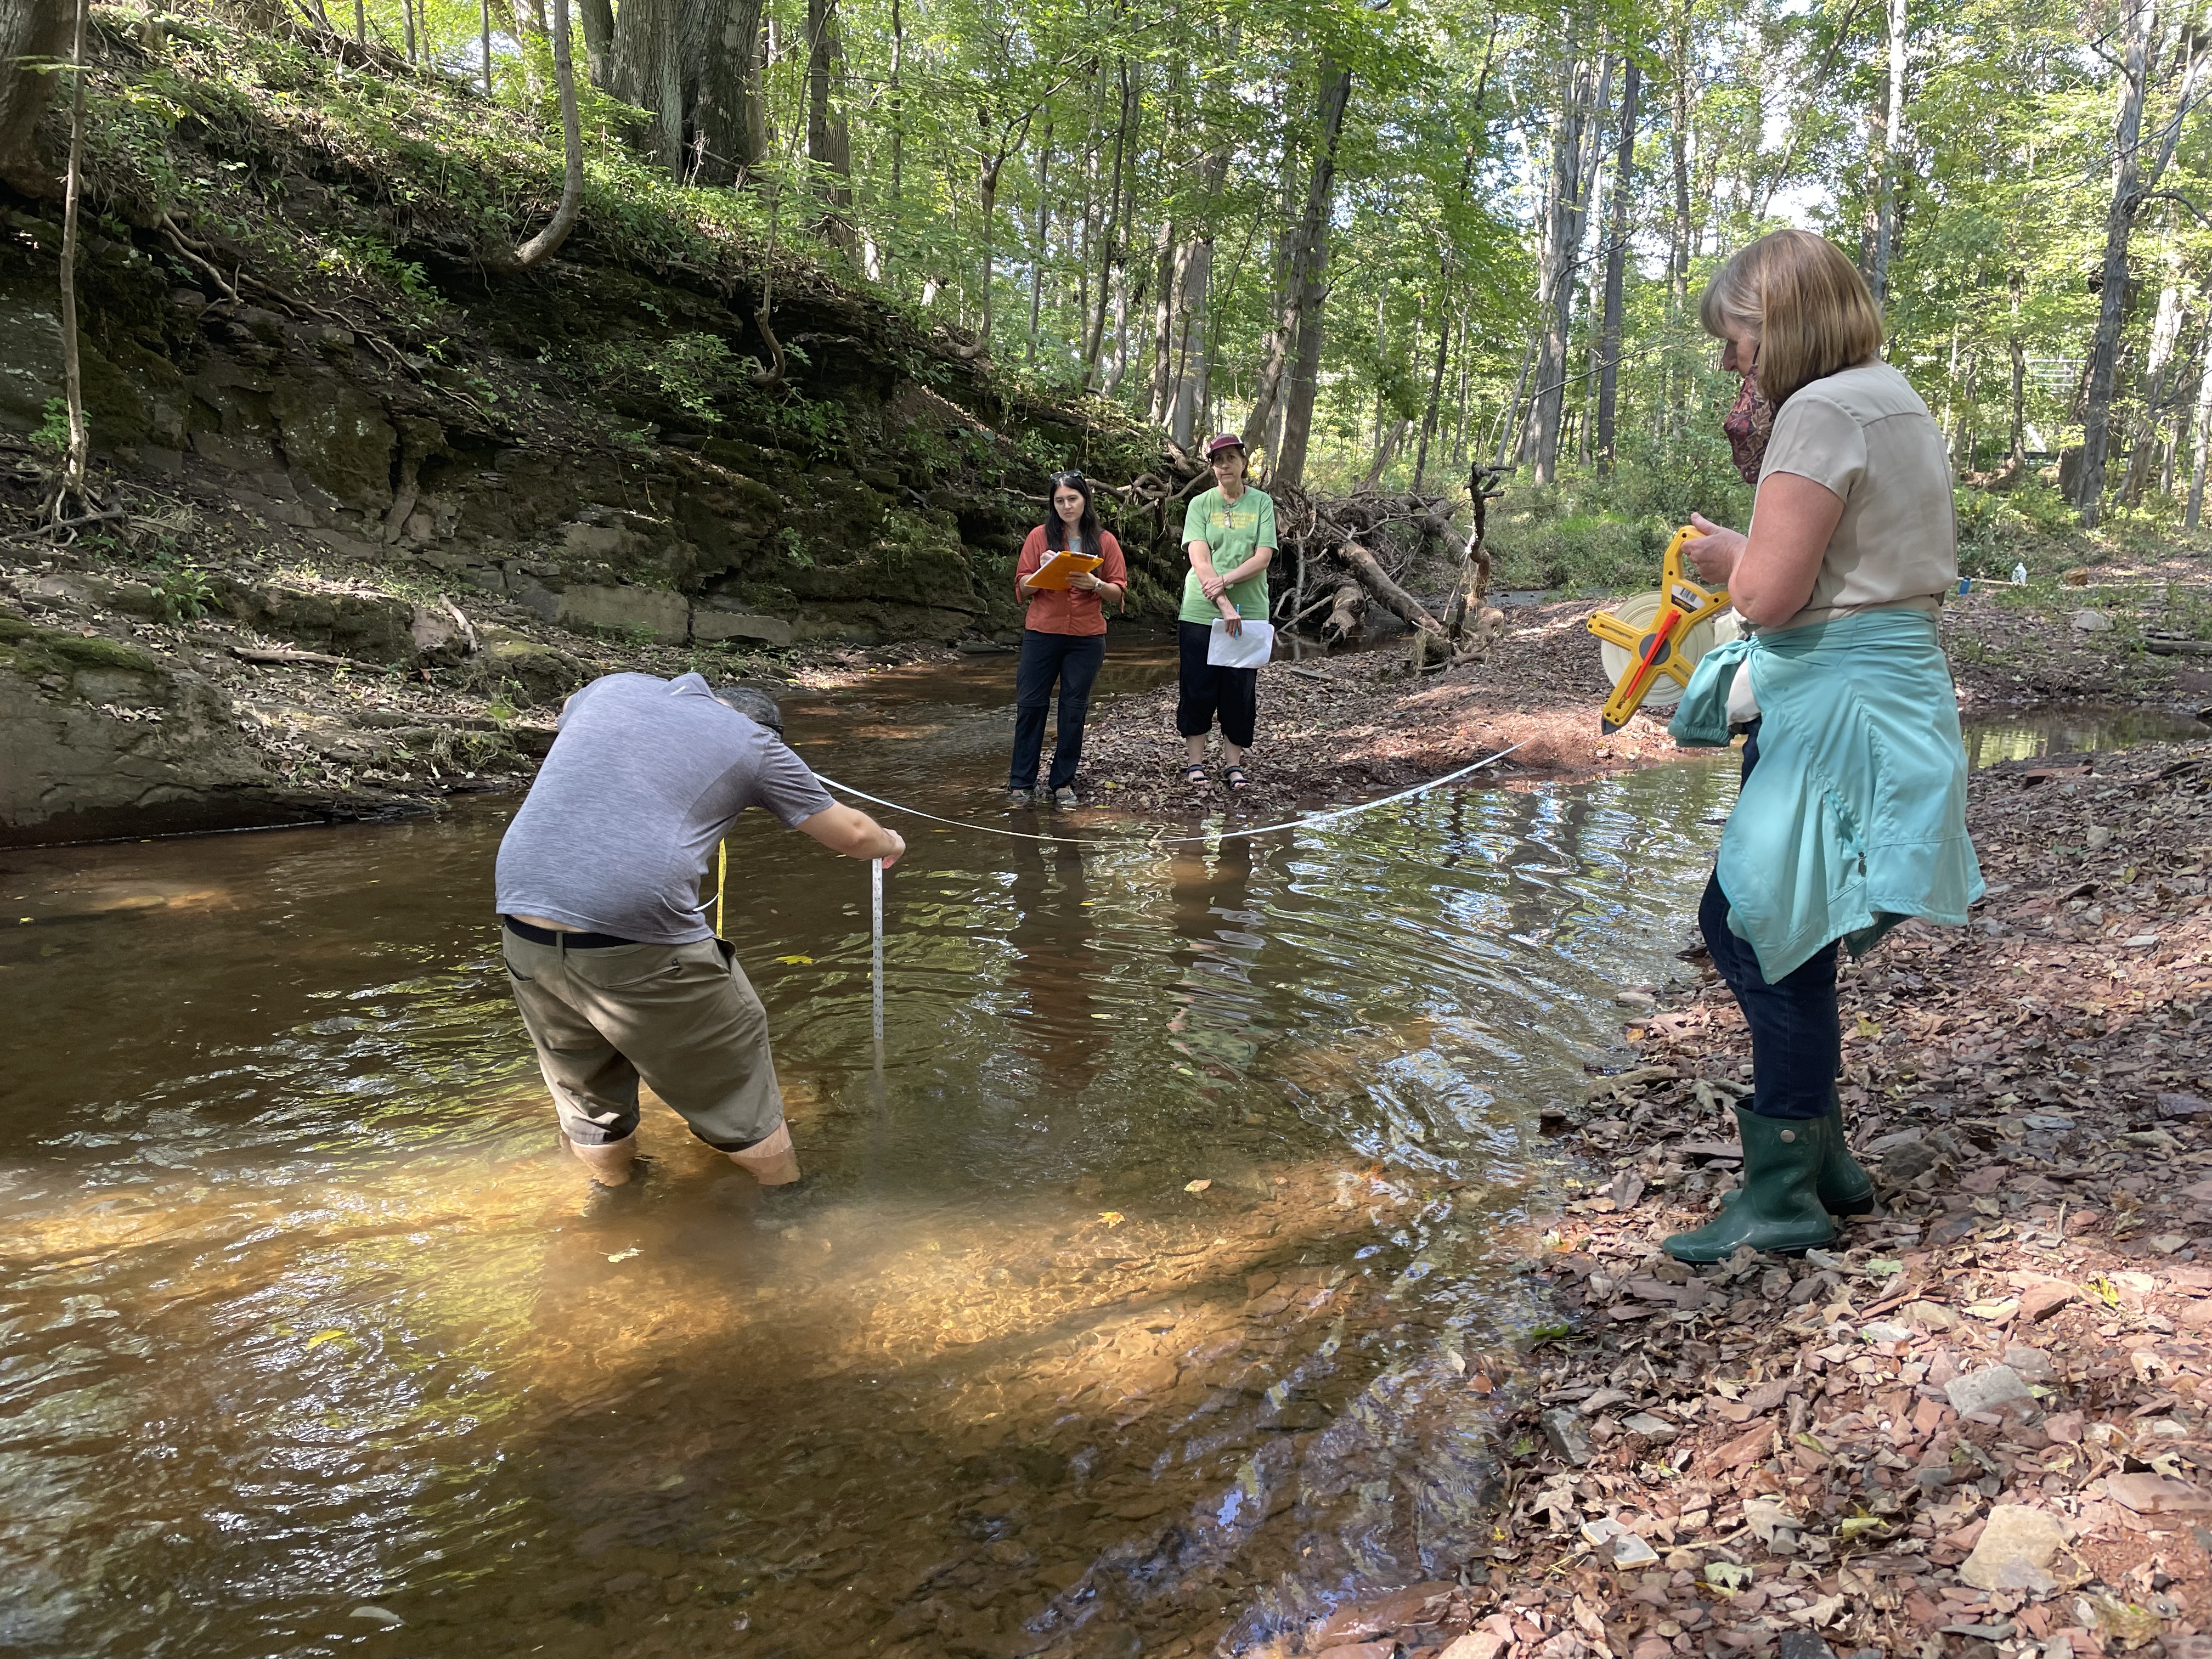 Volunteers collect physical data in Jacobs Creek, Hopewell Township, NJ in Fall 2021